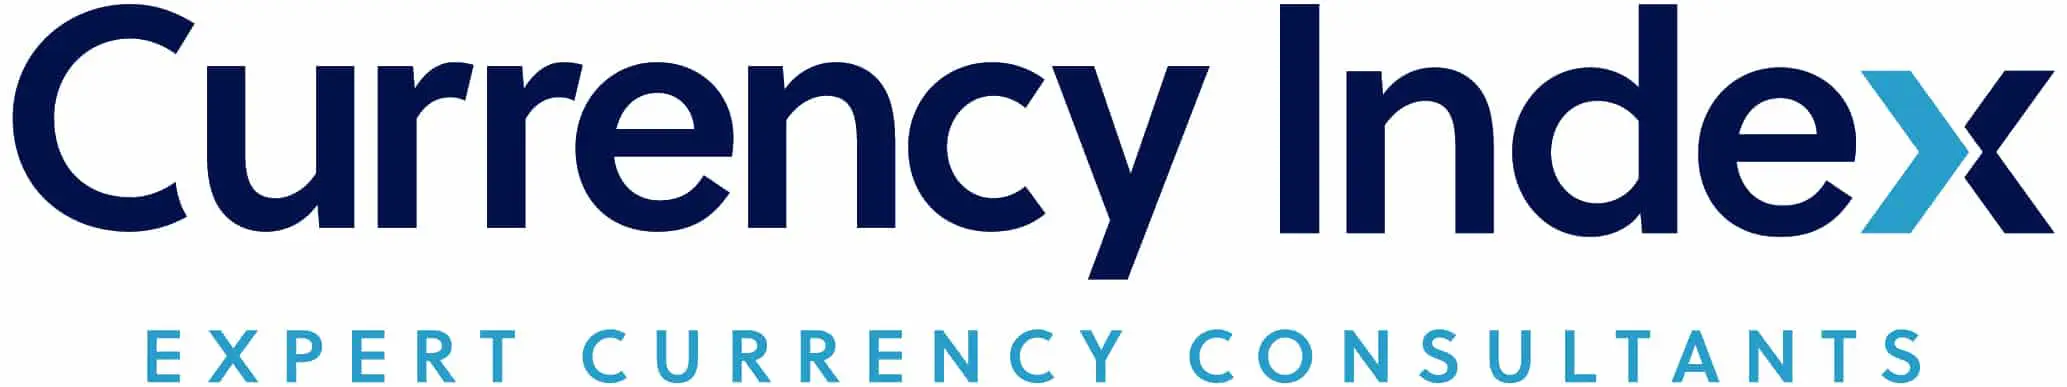 Currency-Index-Logo-Strap